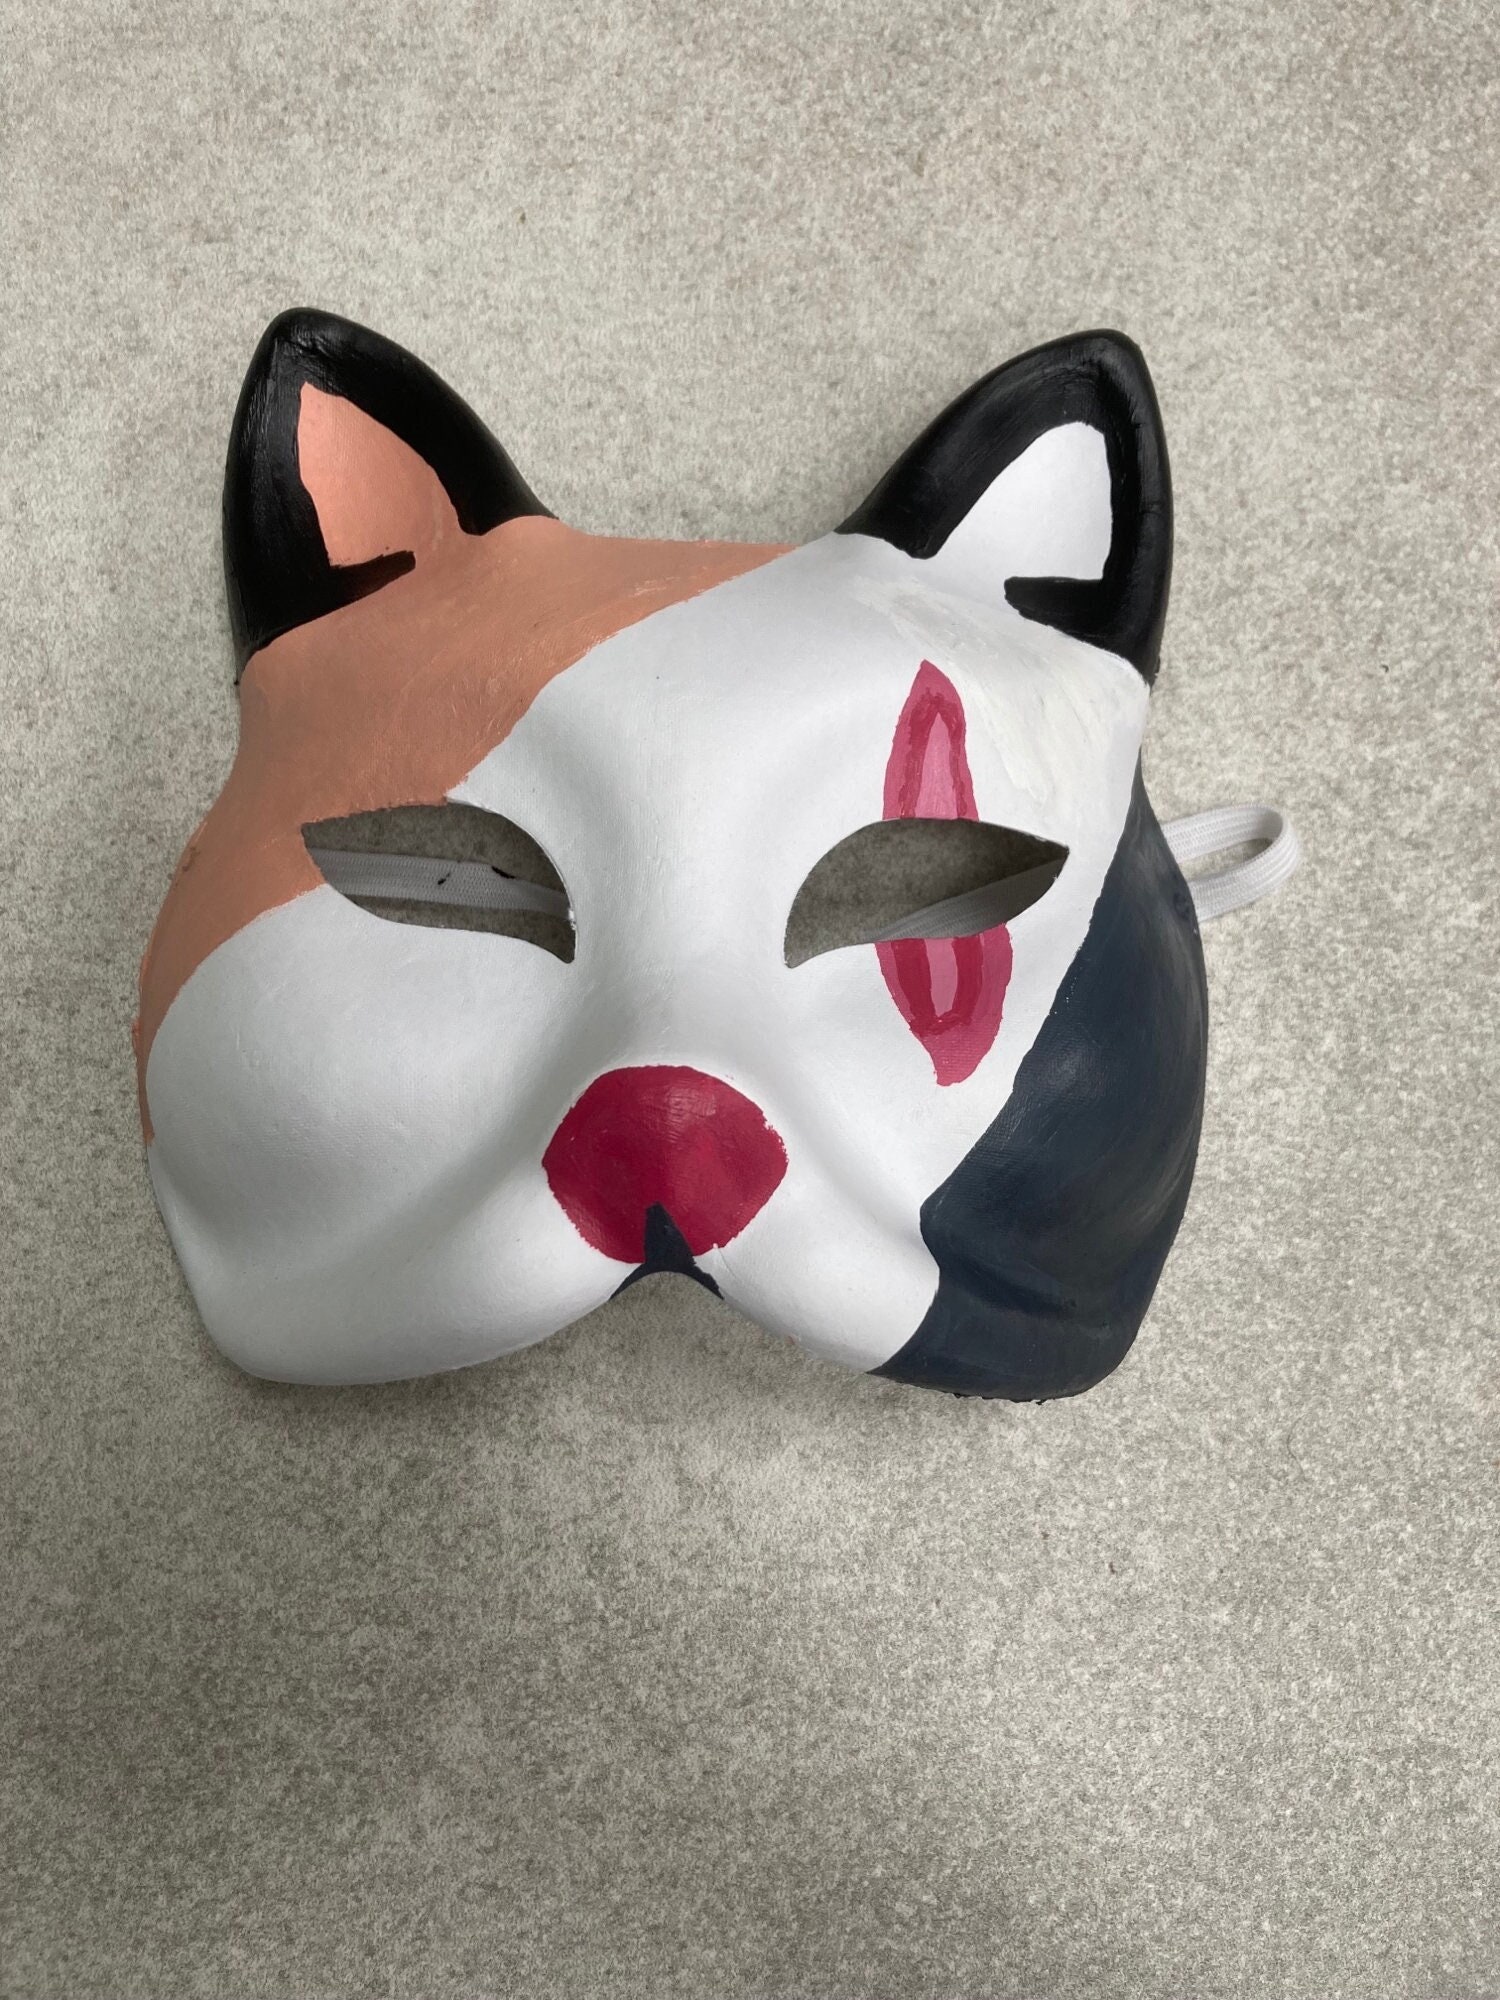 Therian Cat Mask Quadrobics Mask Lynx Mask Therian Mask , therians